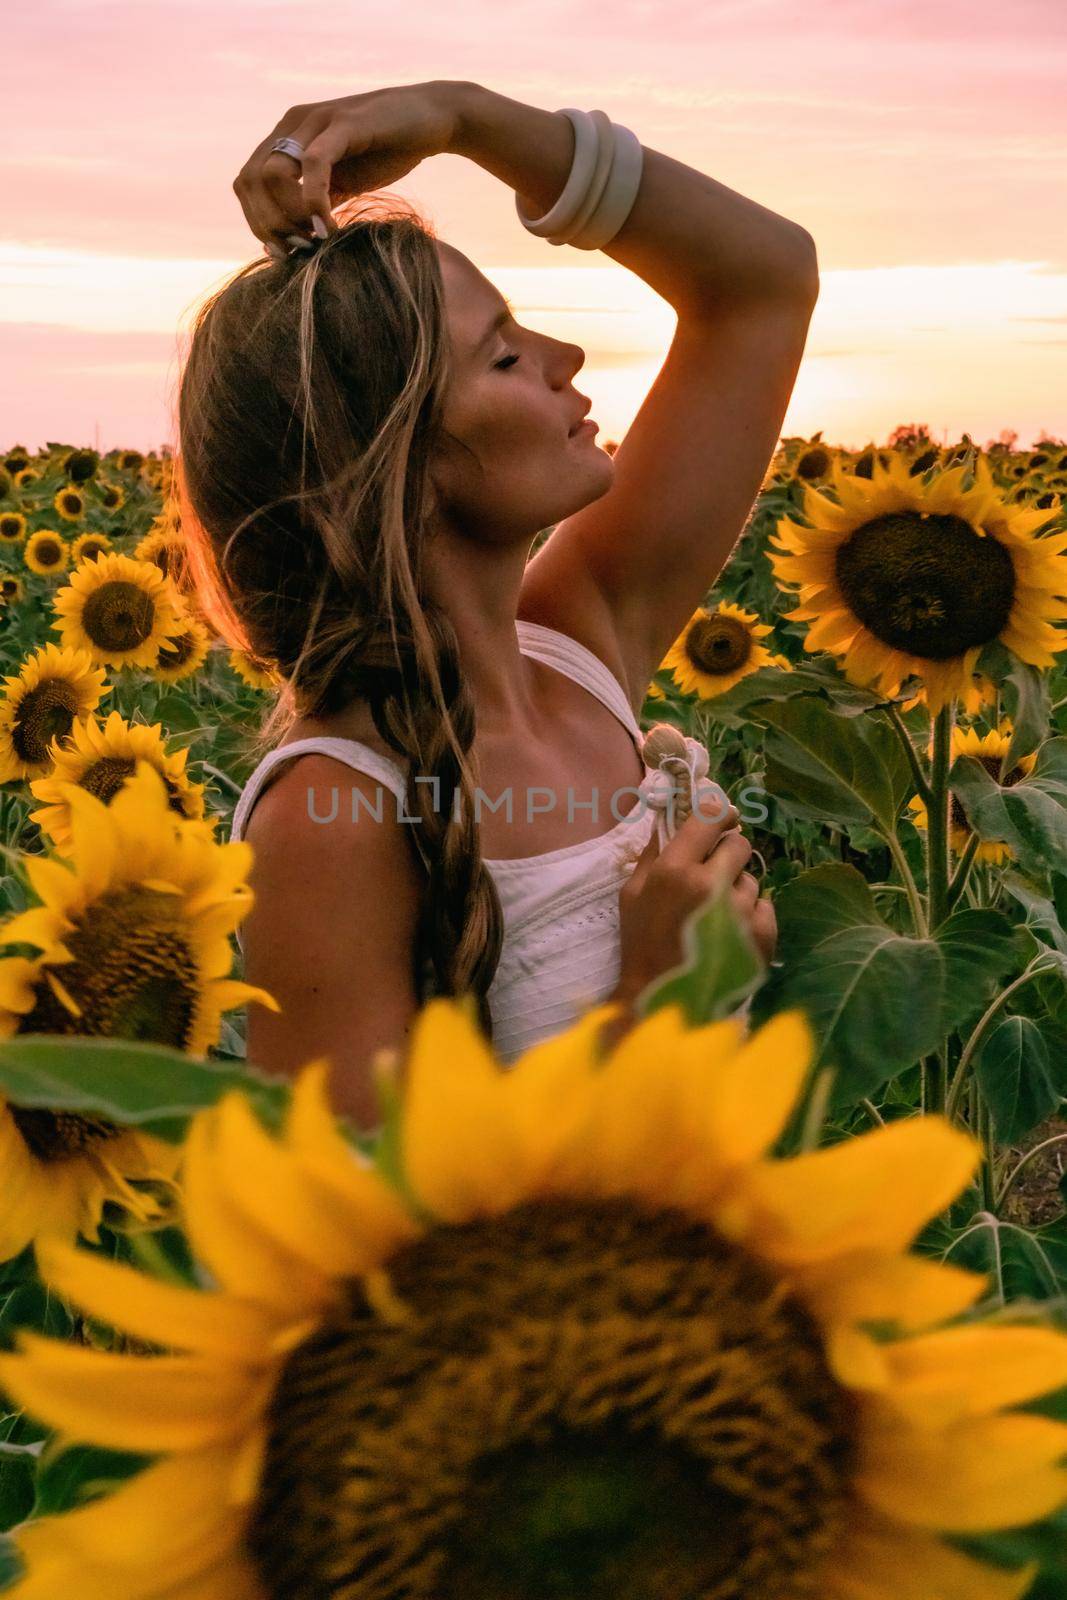 Beautiful middle aged woman looks good in a hat enjoying nature in a field of sunflowers at sunset. Summer. Attractive brunette with long healthy hair